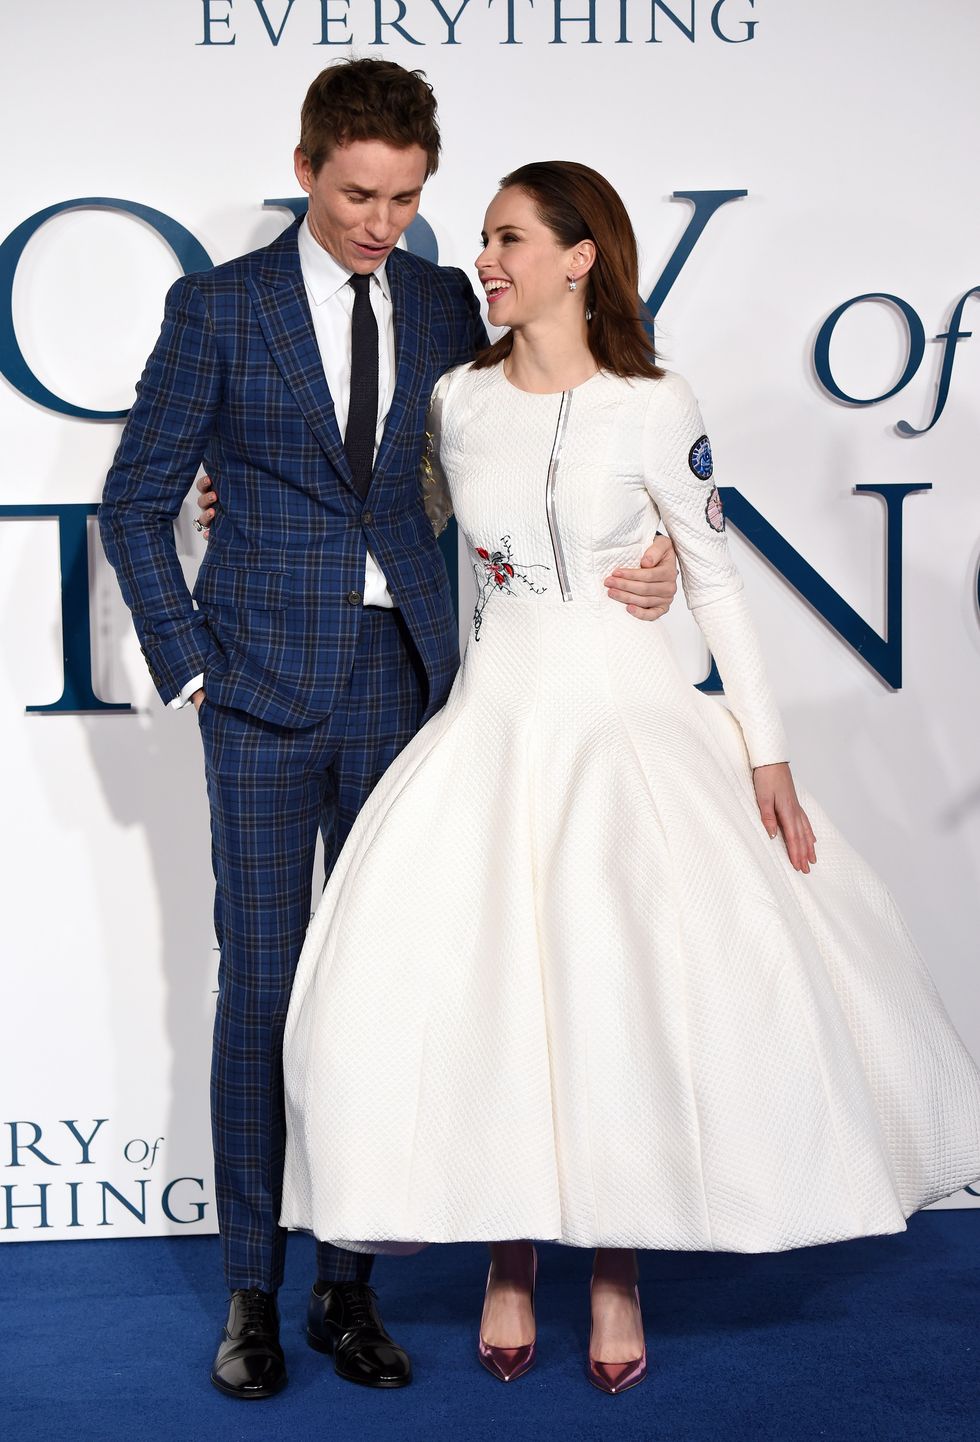 Eddie Redmayne and Felicity Jones at The Theory of Everything premiere